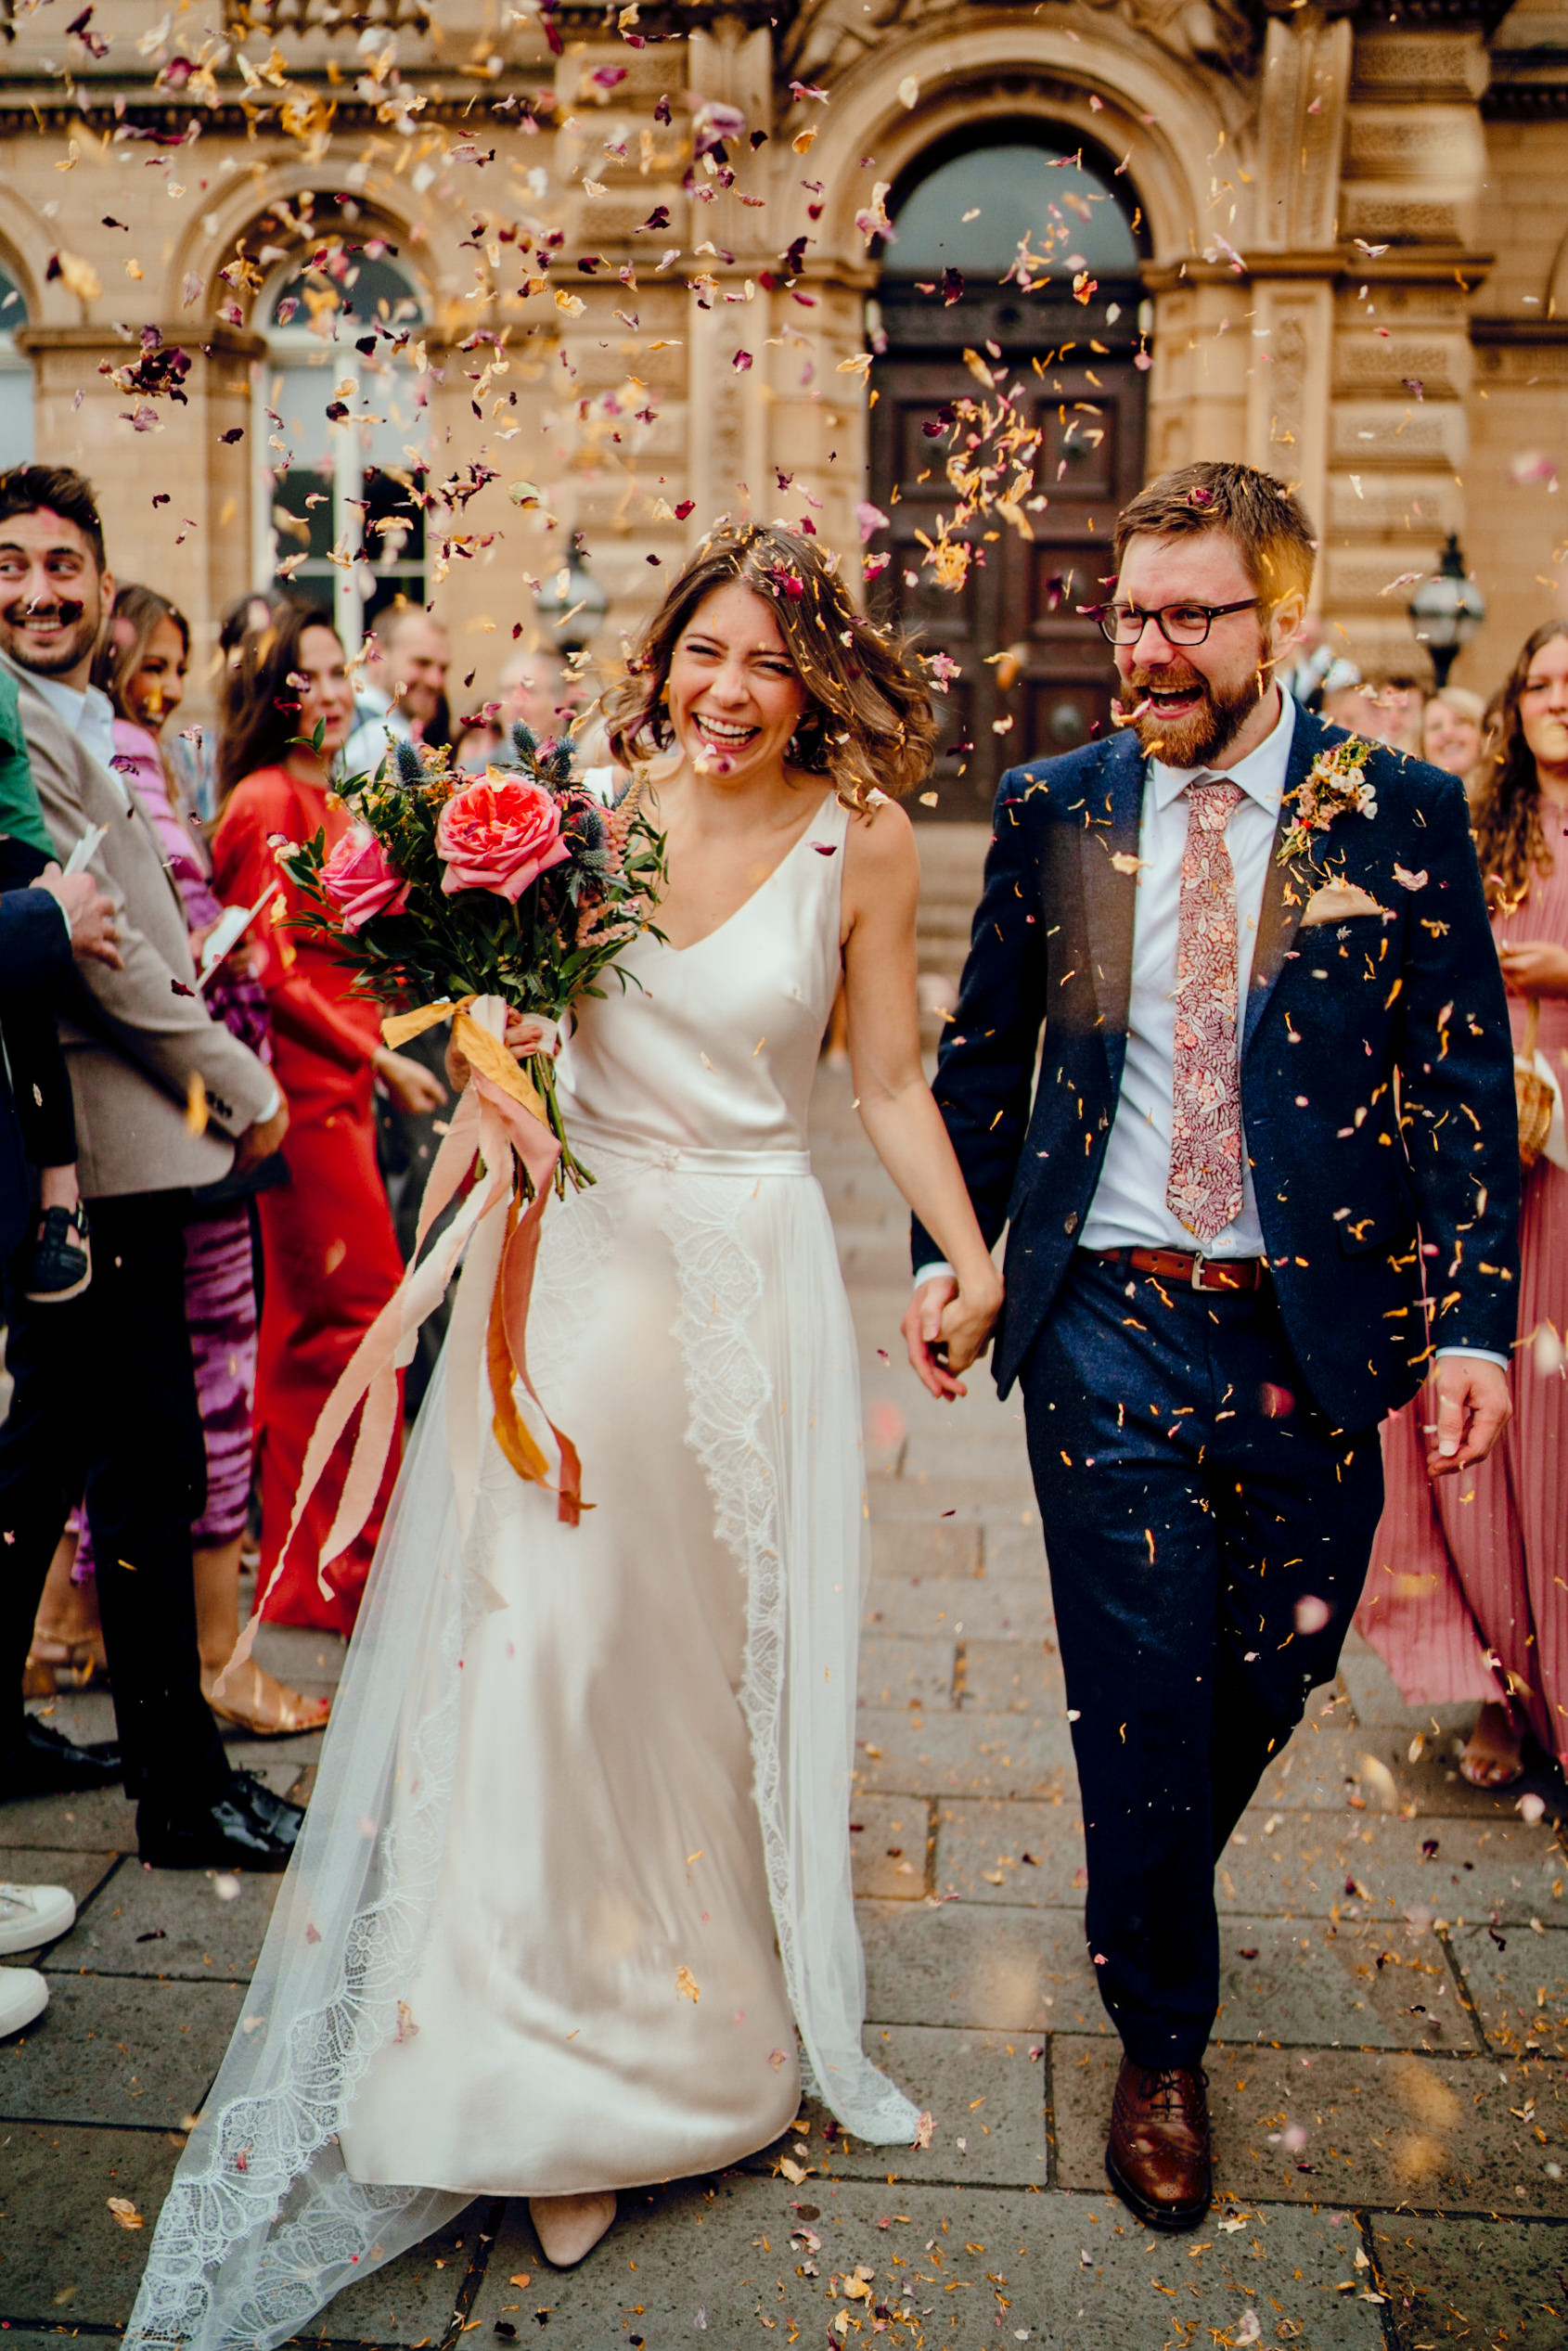 Victoria Hall Saltaire Colourful Wedding Photography